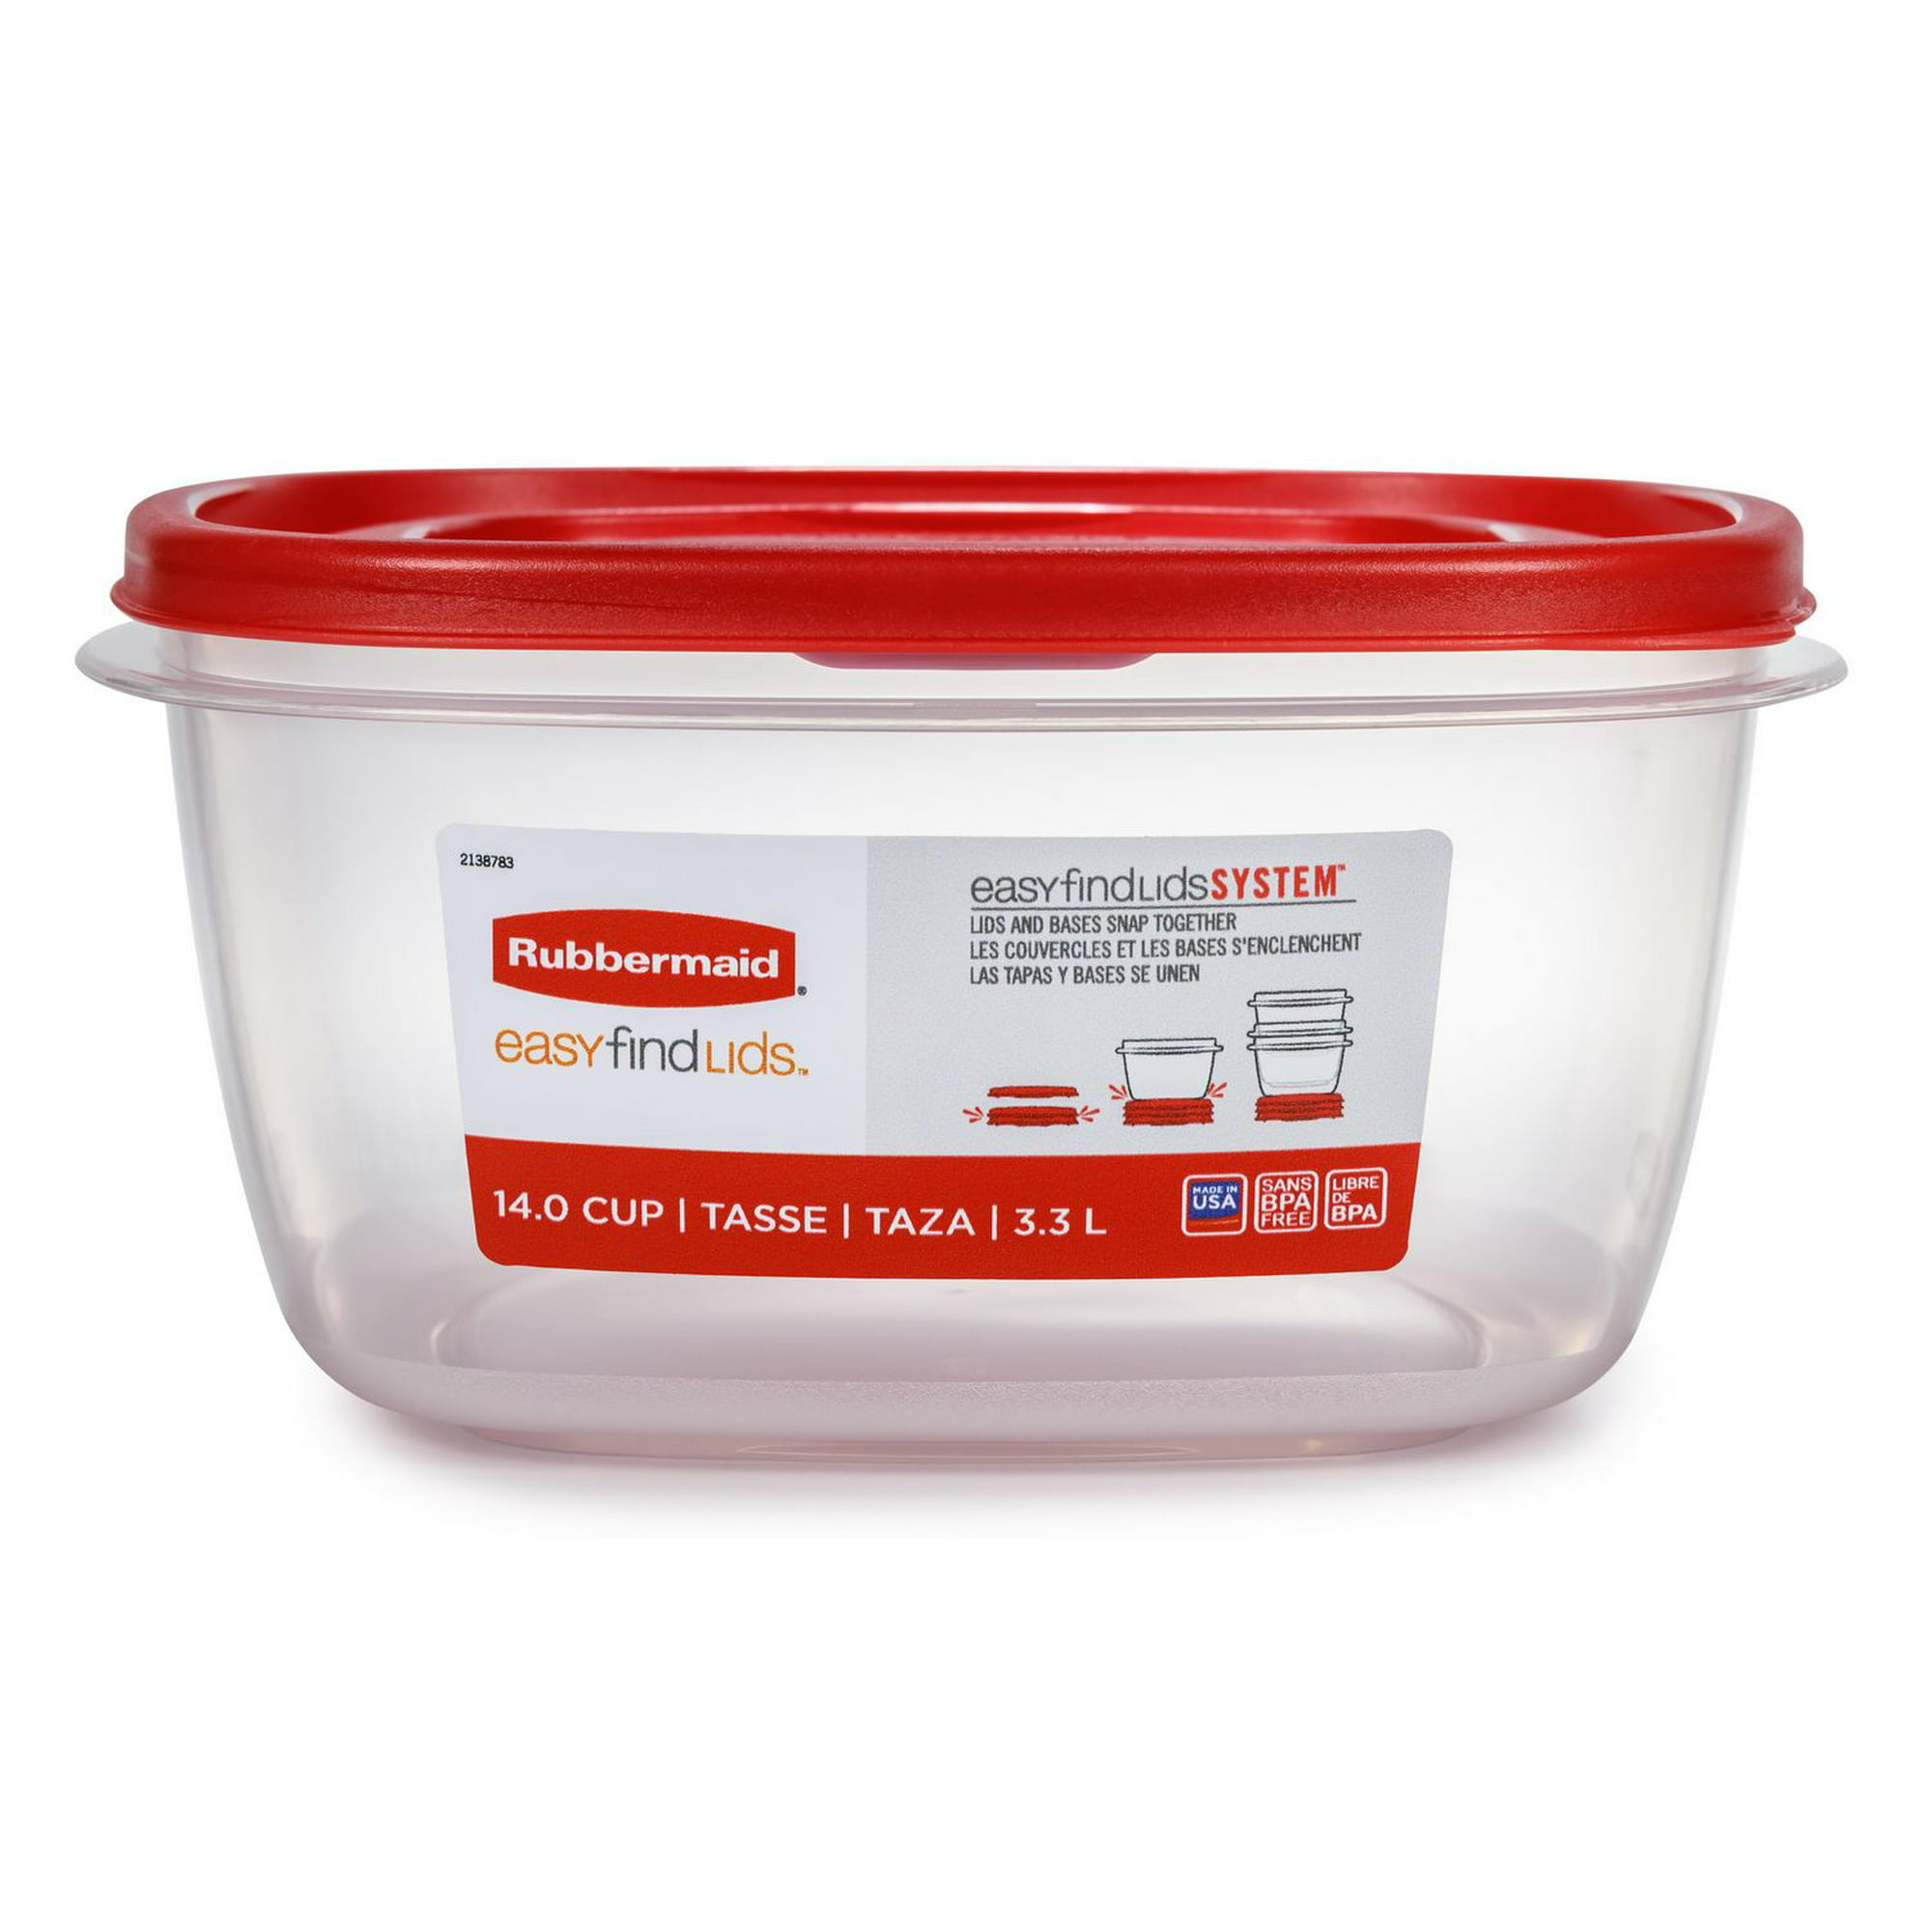 Rubbermaid Easy Find Lid Food Storage Container, 3.3 Litter, Red